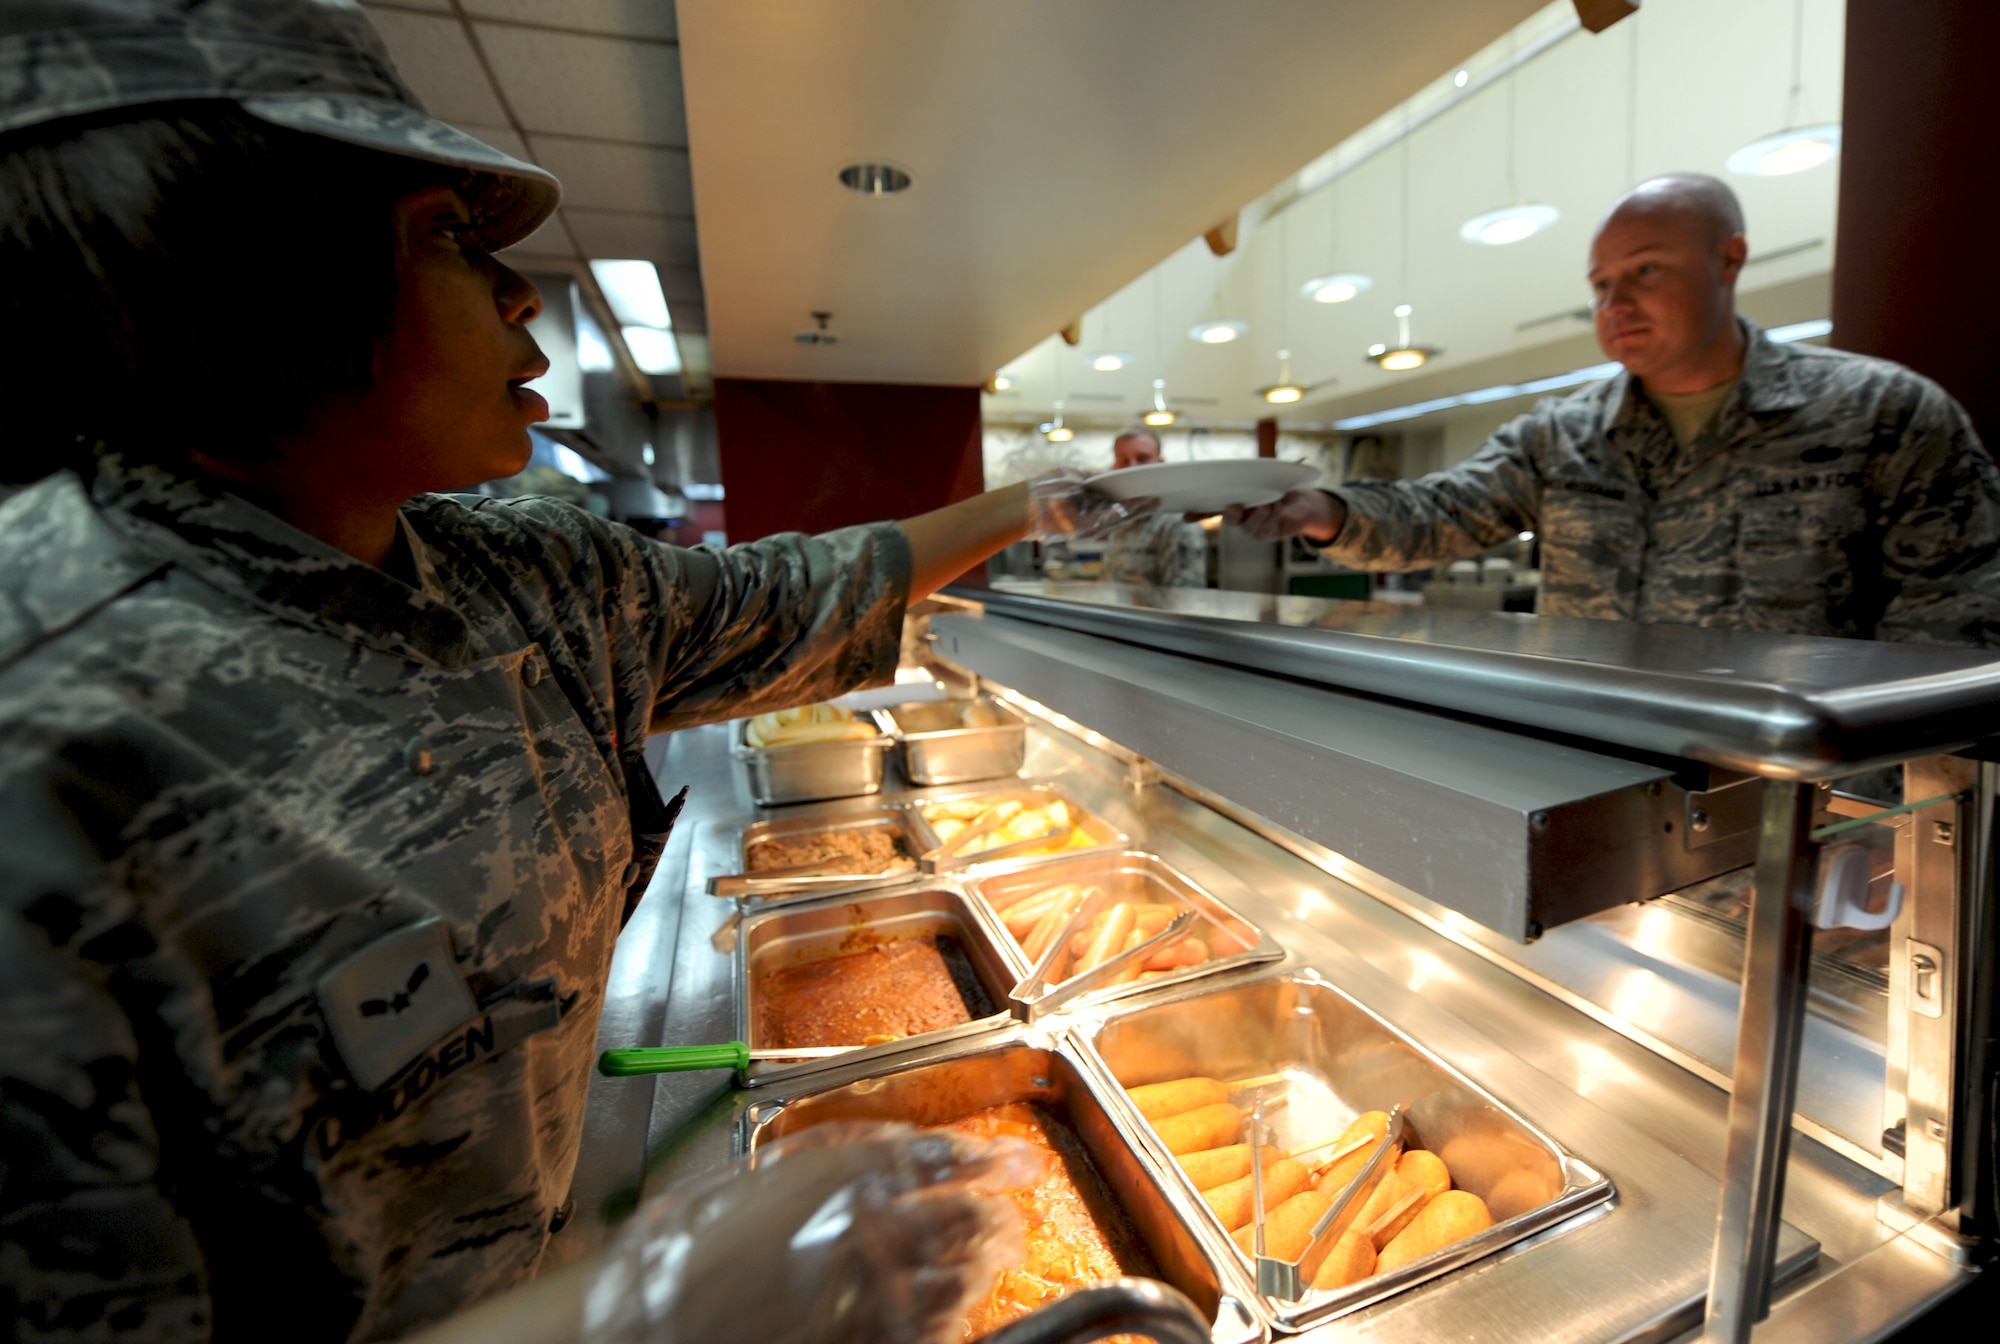 Airman 1st  Class Rayshon Louden, 51st Force Support Squadron food apprentice, serves a customer at the Ginko Tree dining facility at Osan Air Base, Republic of Korea April 23, 2013. The Ginko Tree prepares meals for more than 1300 members daily. (U.S. Air Force photo/Staff Sgt. Sara Csurilla)